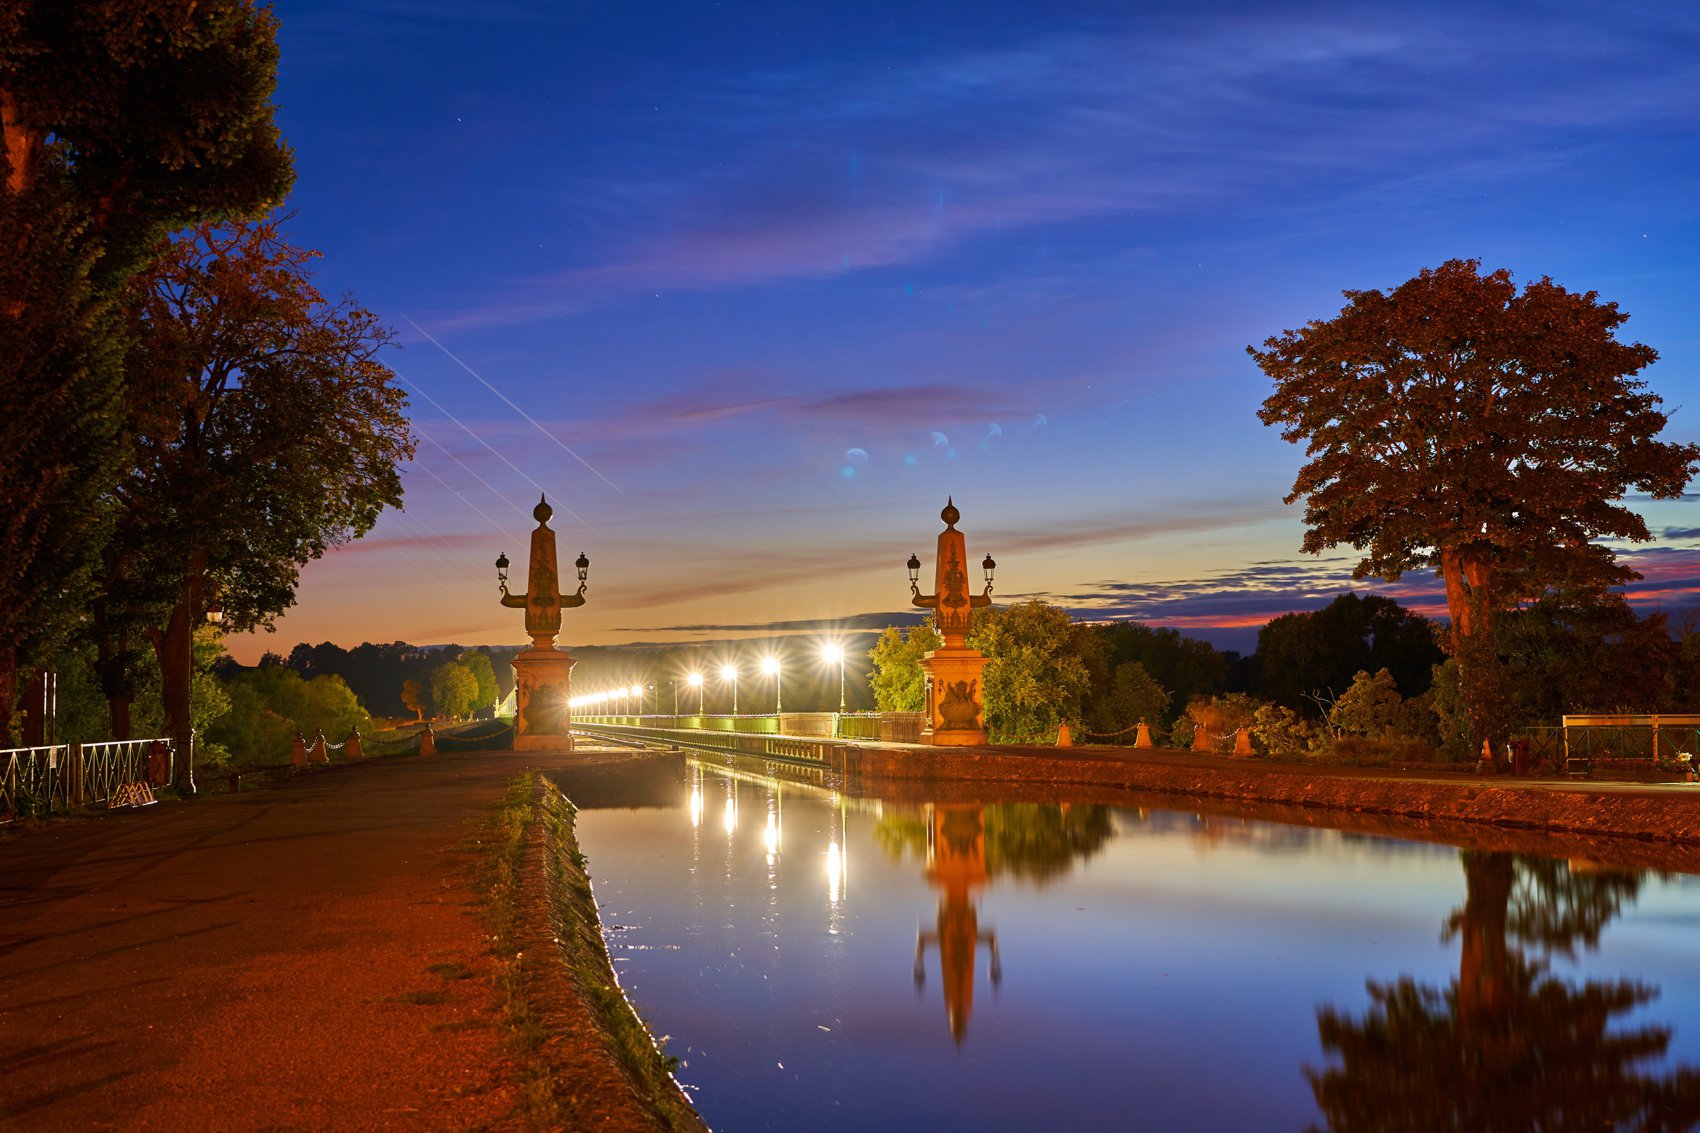 Hero Image for Briare-le-Canal, Loiret, France in Sept 2020